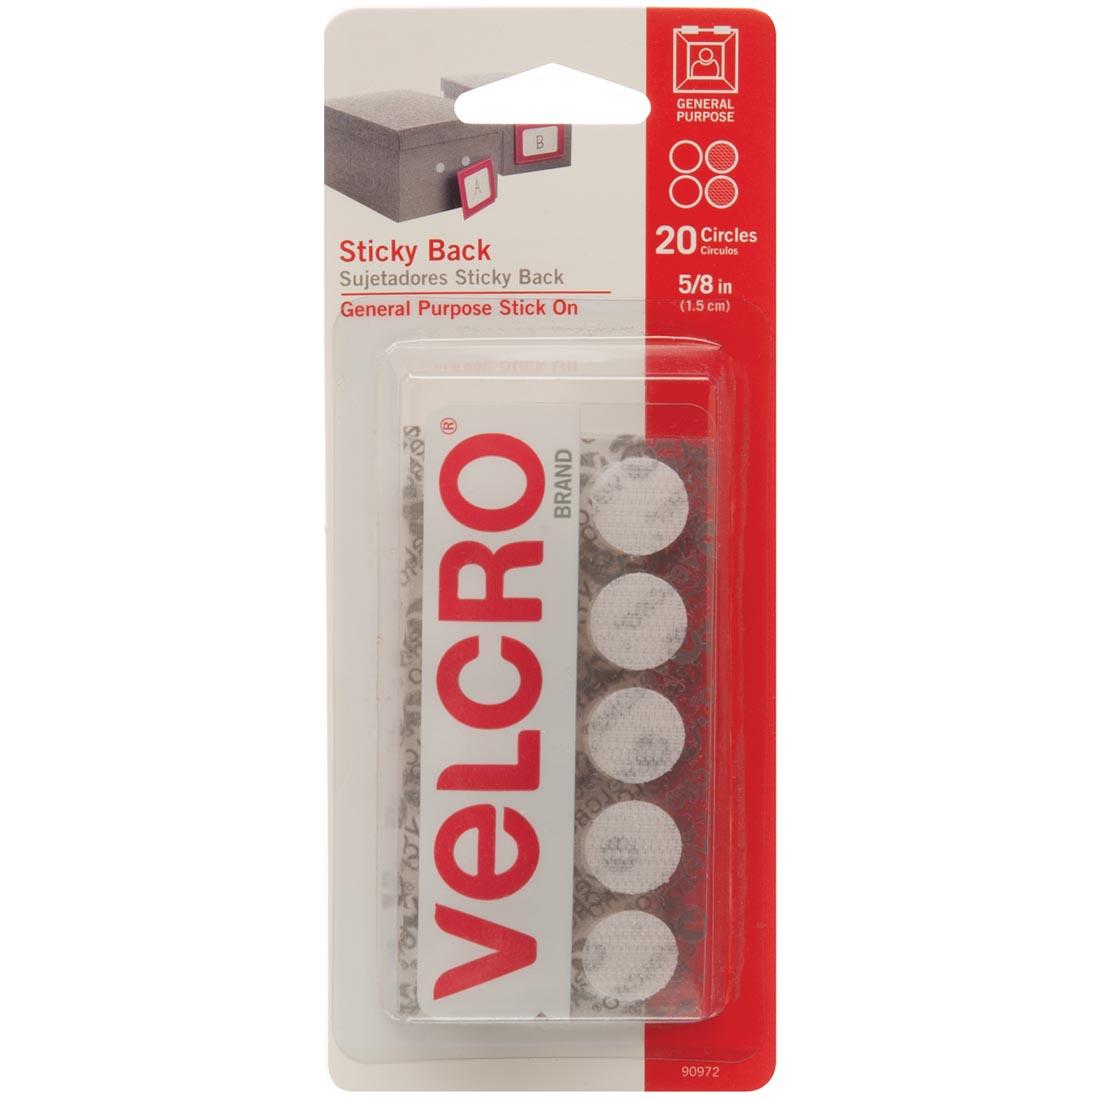 Package of VELCRO Brand Sticky Back White Coins